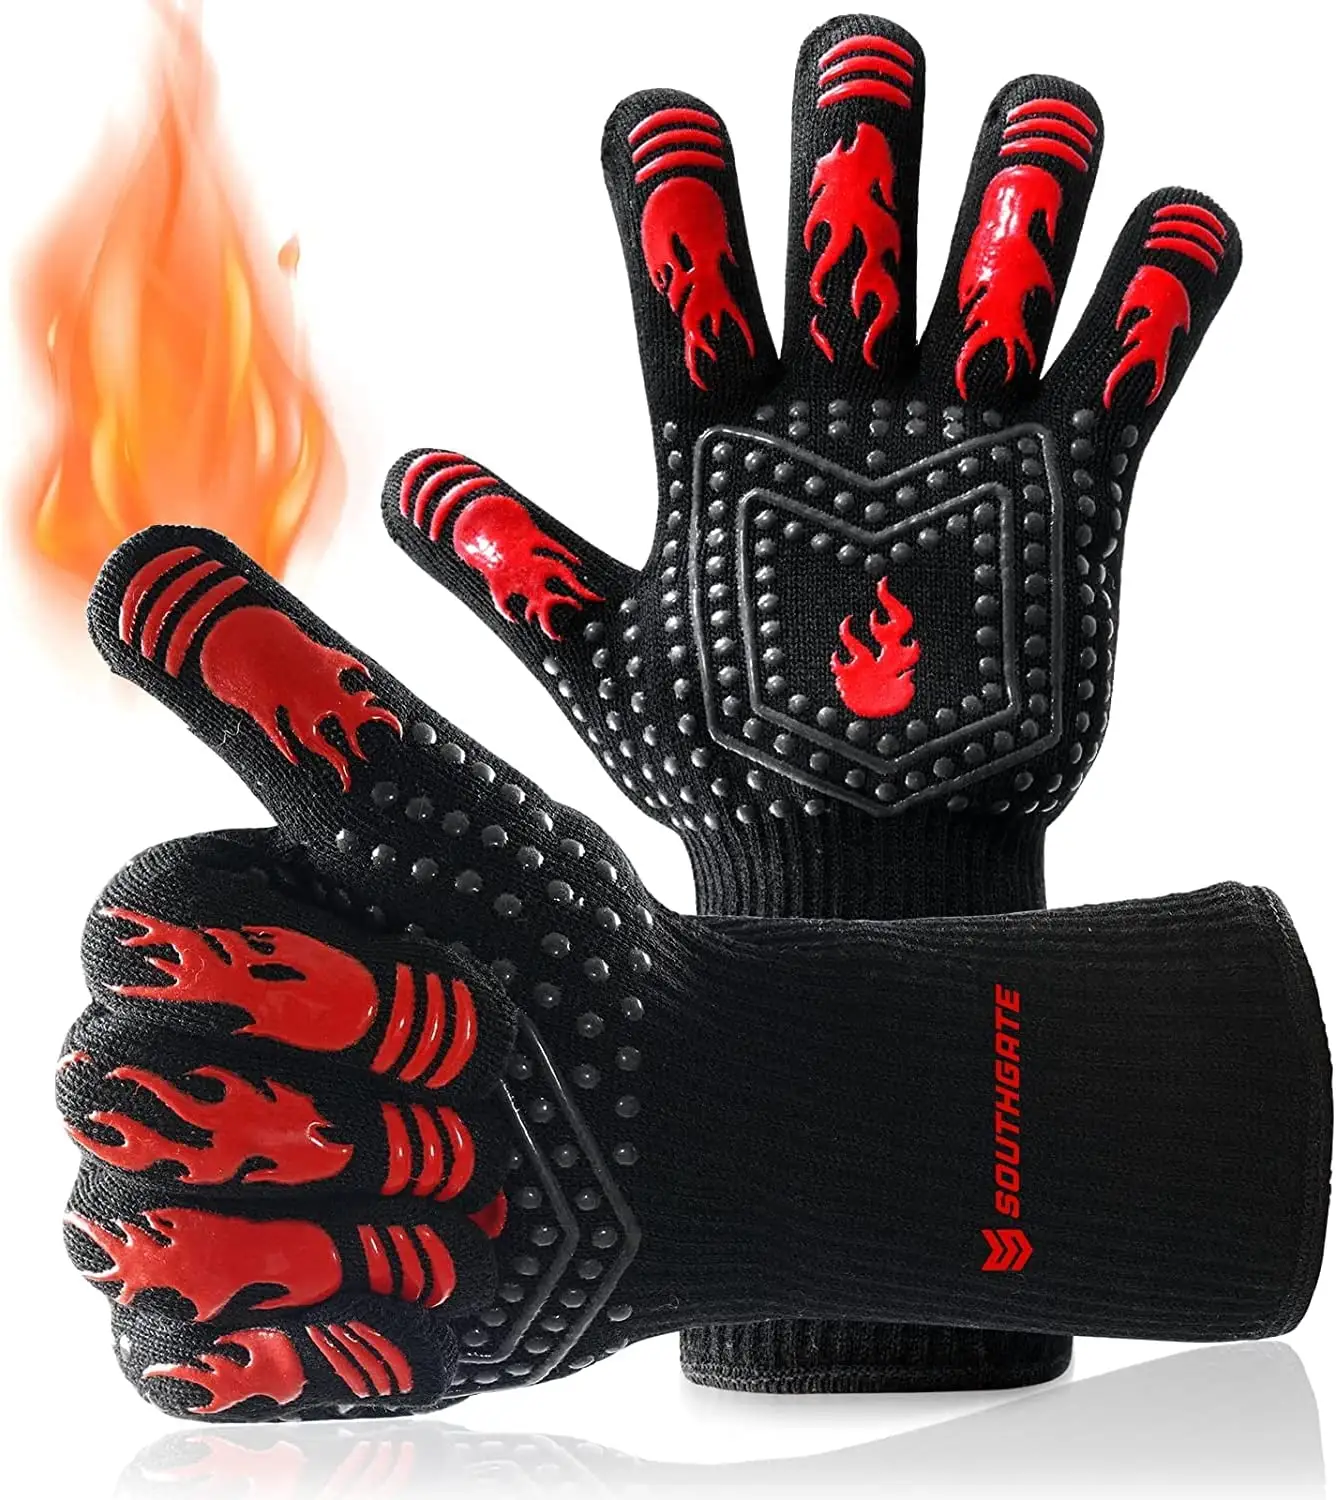 EN407 Certified Silicone coated aramid grill gloves Extreme heat resistant 1472 F bbq gloves for cooking